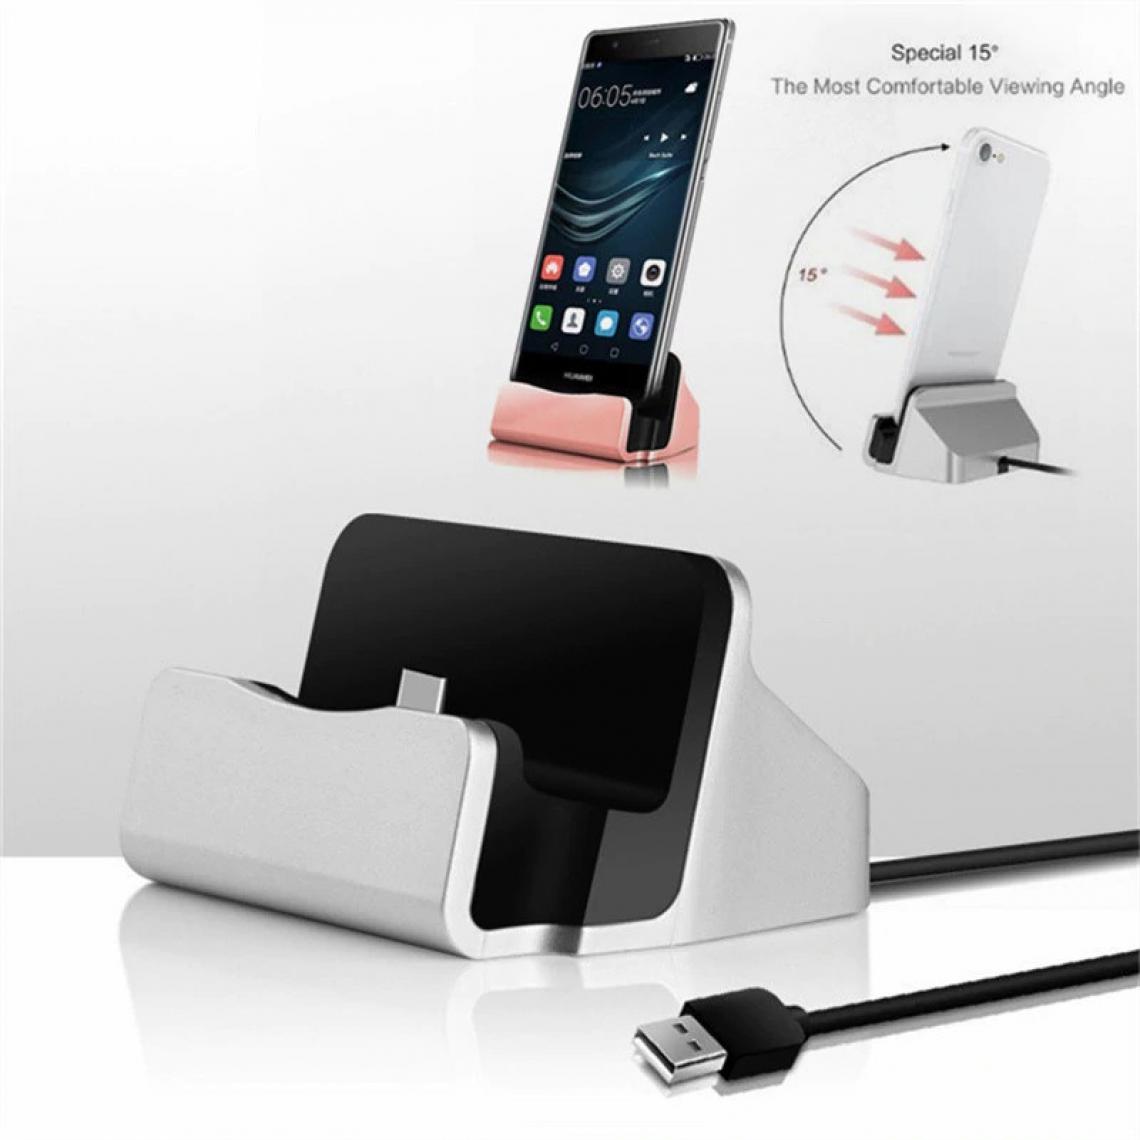 Shot - Station d'Accueil de Chargement pour "SAMSUNG Galaxy XCover Pro" Smartphone Type C Support Chargeur Bureau (ROSE) - Station d'accueil smartphone